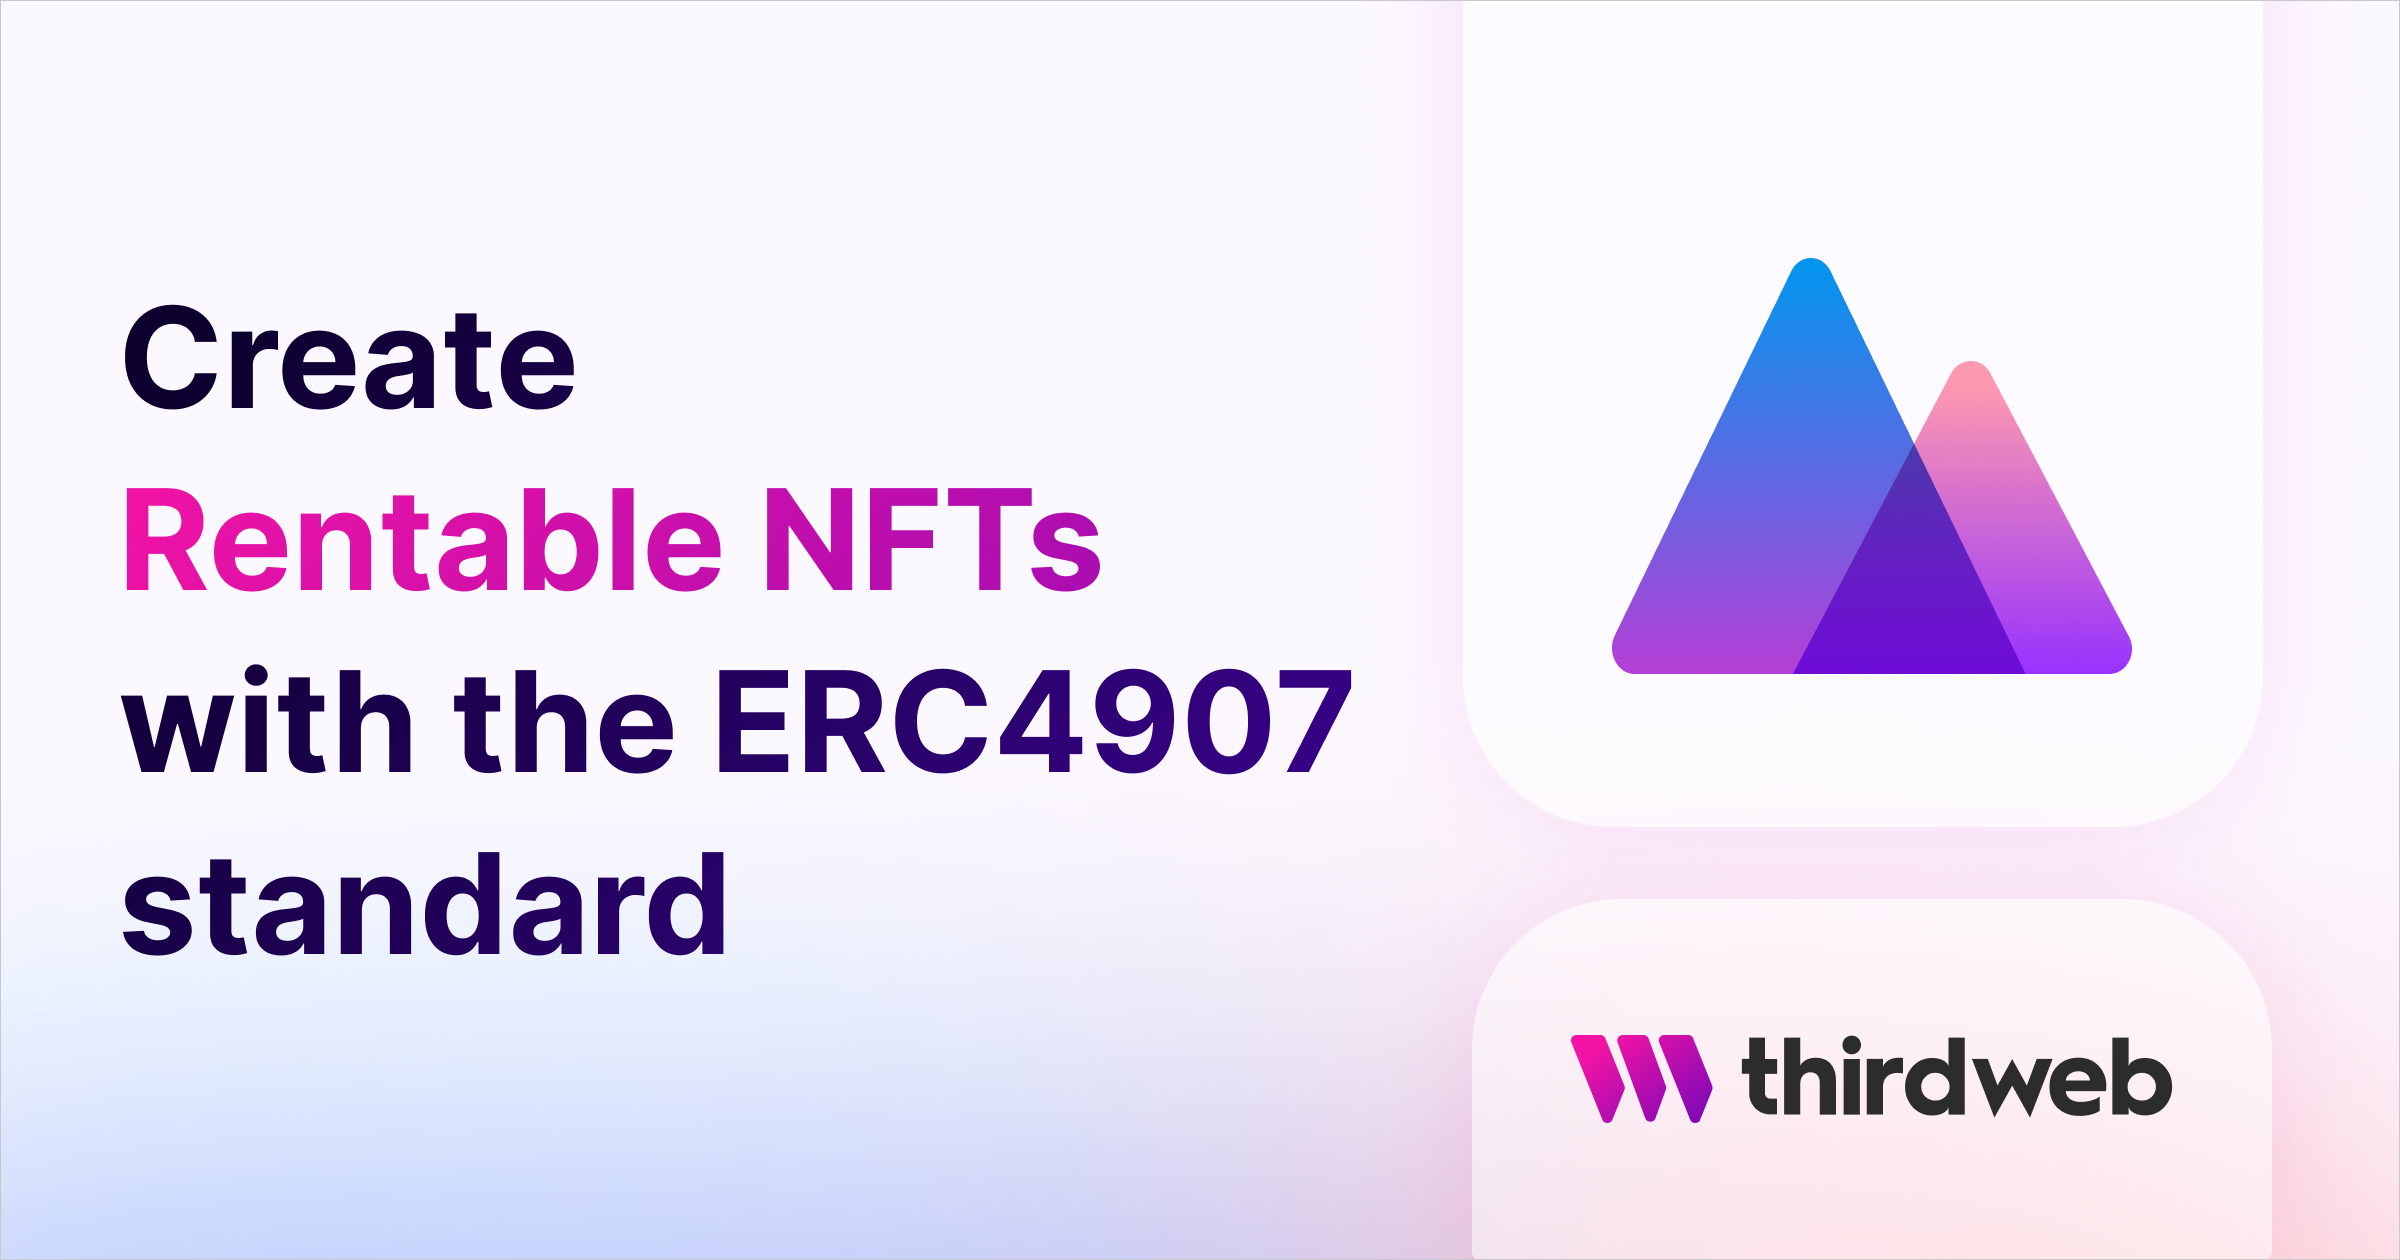 Create Rentable NFTs with the ERC4907 standard